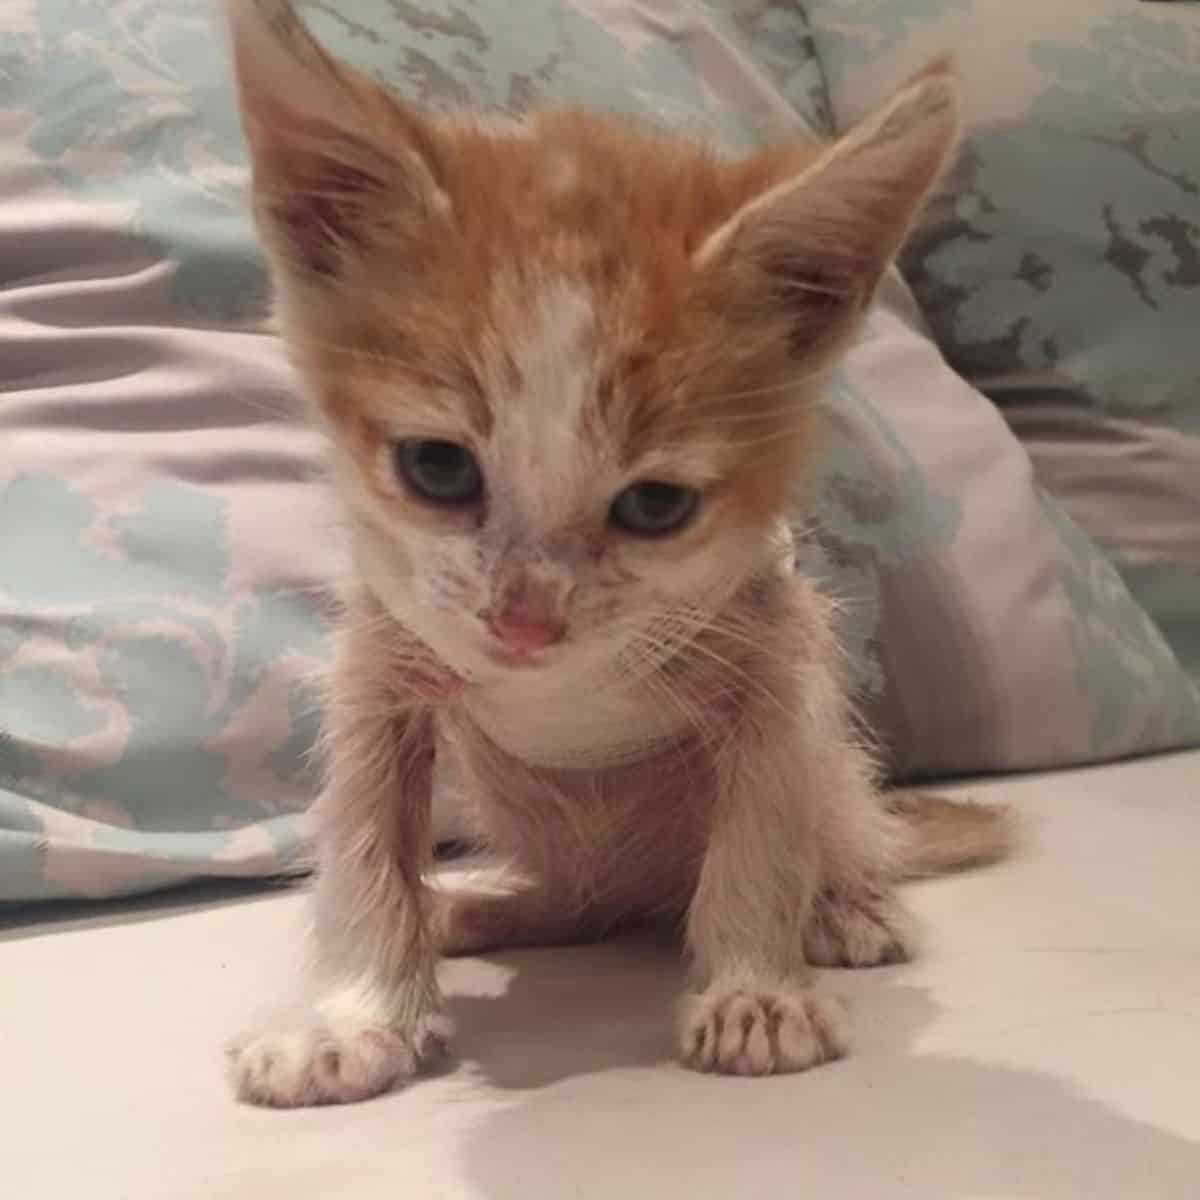 a bandaged kitten sits on the bed